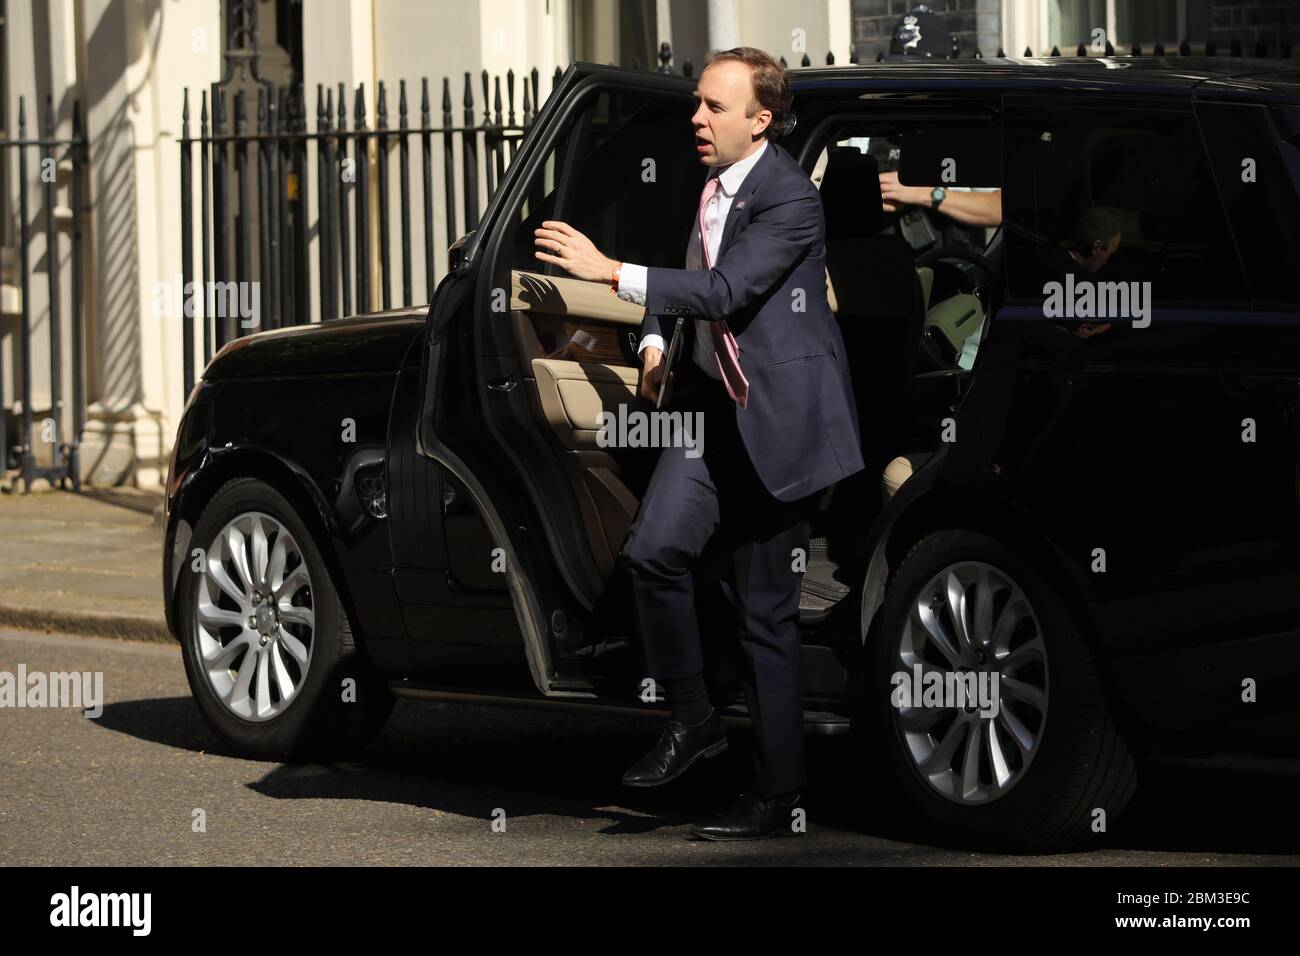 London, Britain. 6th May, 2020. British Health Secretary Matt Hancock arrives at 10 Downing Street for the COVID-19 committee meeting in London, Britain, on May 6, 2020. Another 649 COVID-19 patients have died, bringing the total coronavirus-related death toll in Britain to 30,076, Secretary of State for Housing, Communities and Local Government Robert Jenrick said Wednesday. Credit: Tim Ireland/Xinhua/Alamy Live News Stock Photo